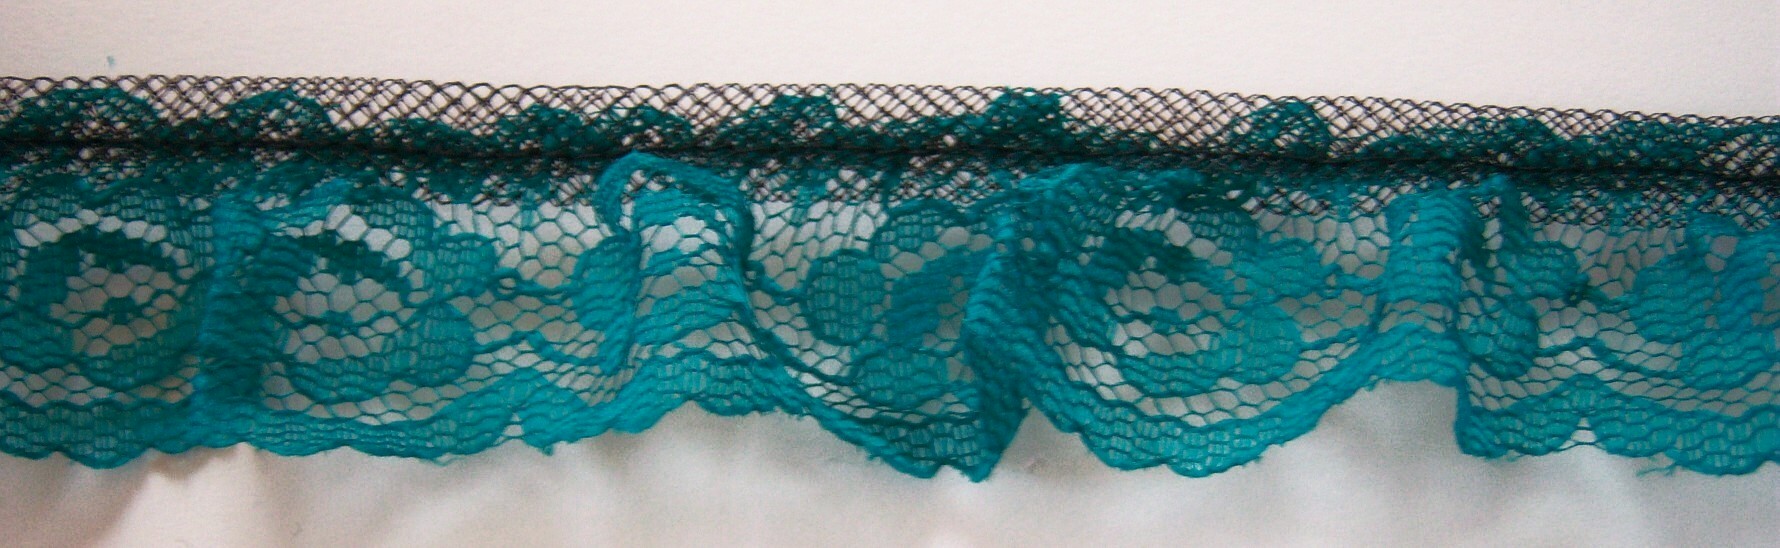 Black/Teal 1 1/4" Ruffled Lace